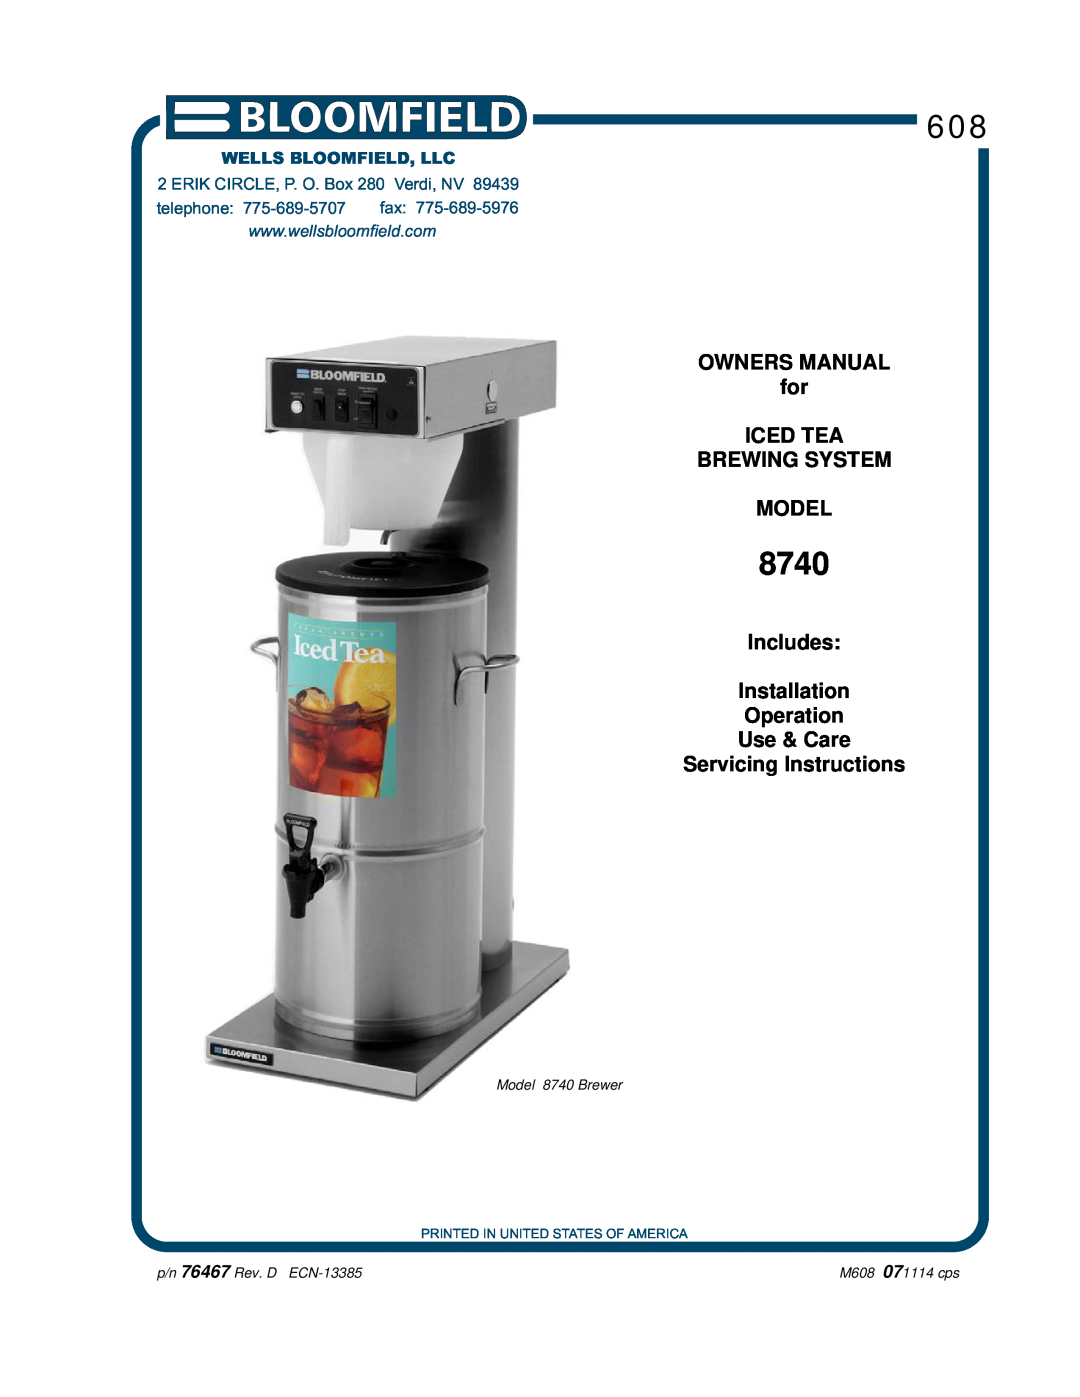 Bloomfield 8740 owner manual Includes Installation Operation Use & Care, Servicing Instructions, Wells Bloomfield, Llc 